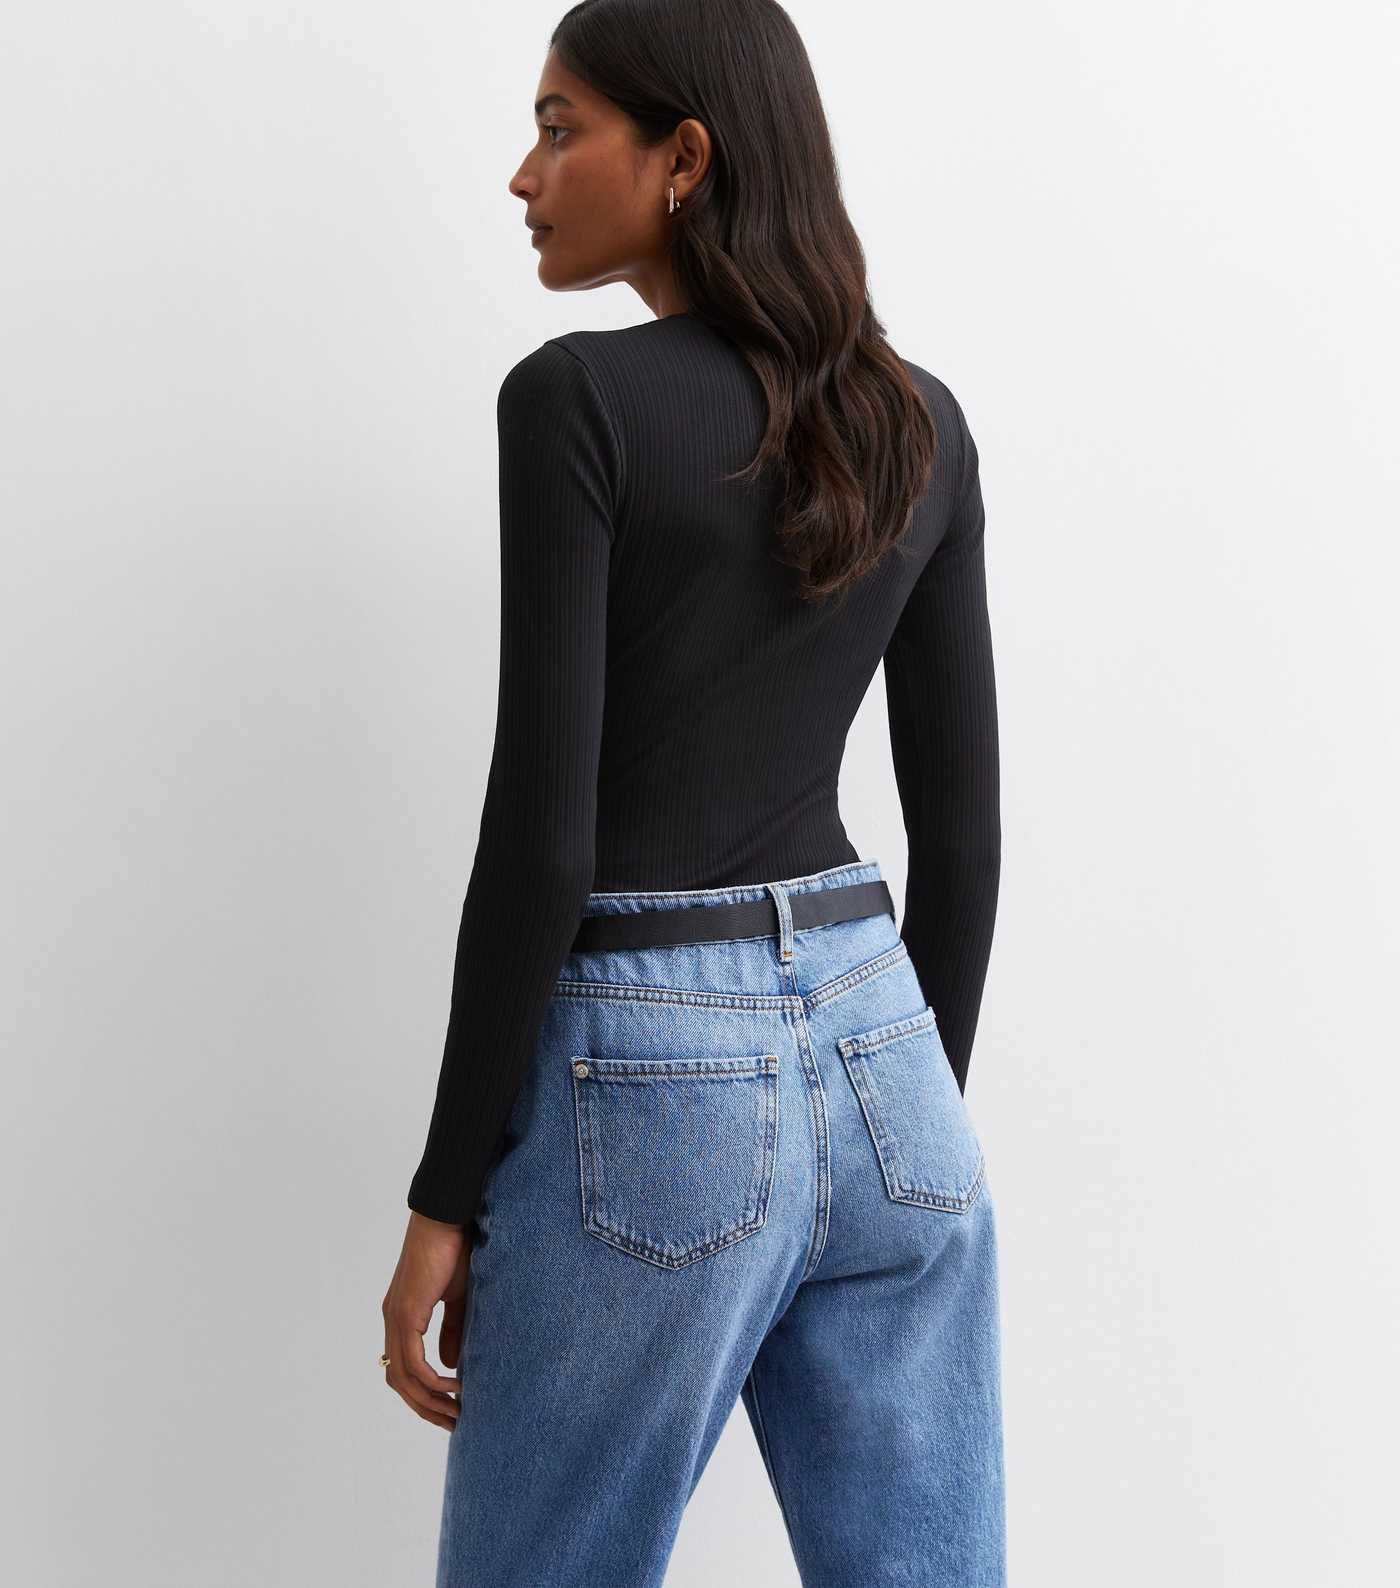 Black Ribbed Crew Neck Bodysuit
						
						Add to Saved Items
						Remove from Saved Items | New Look (UK)